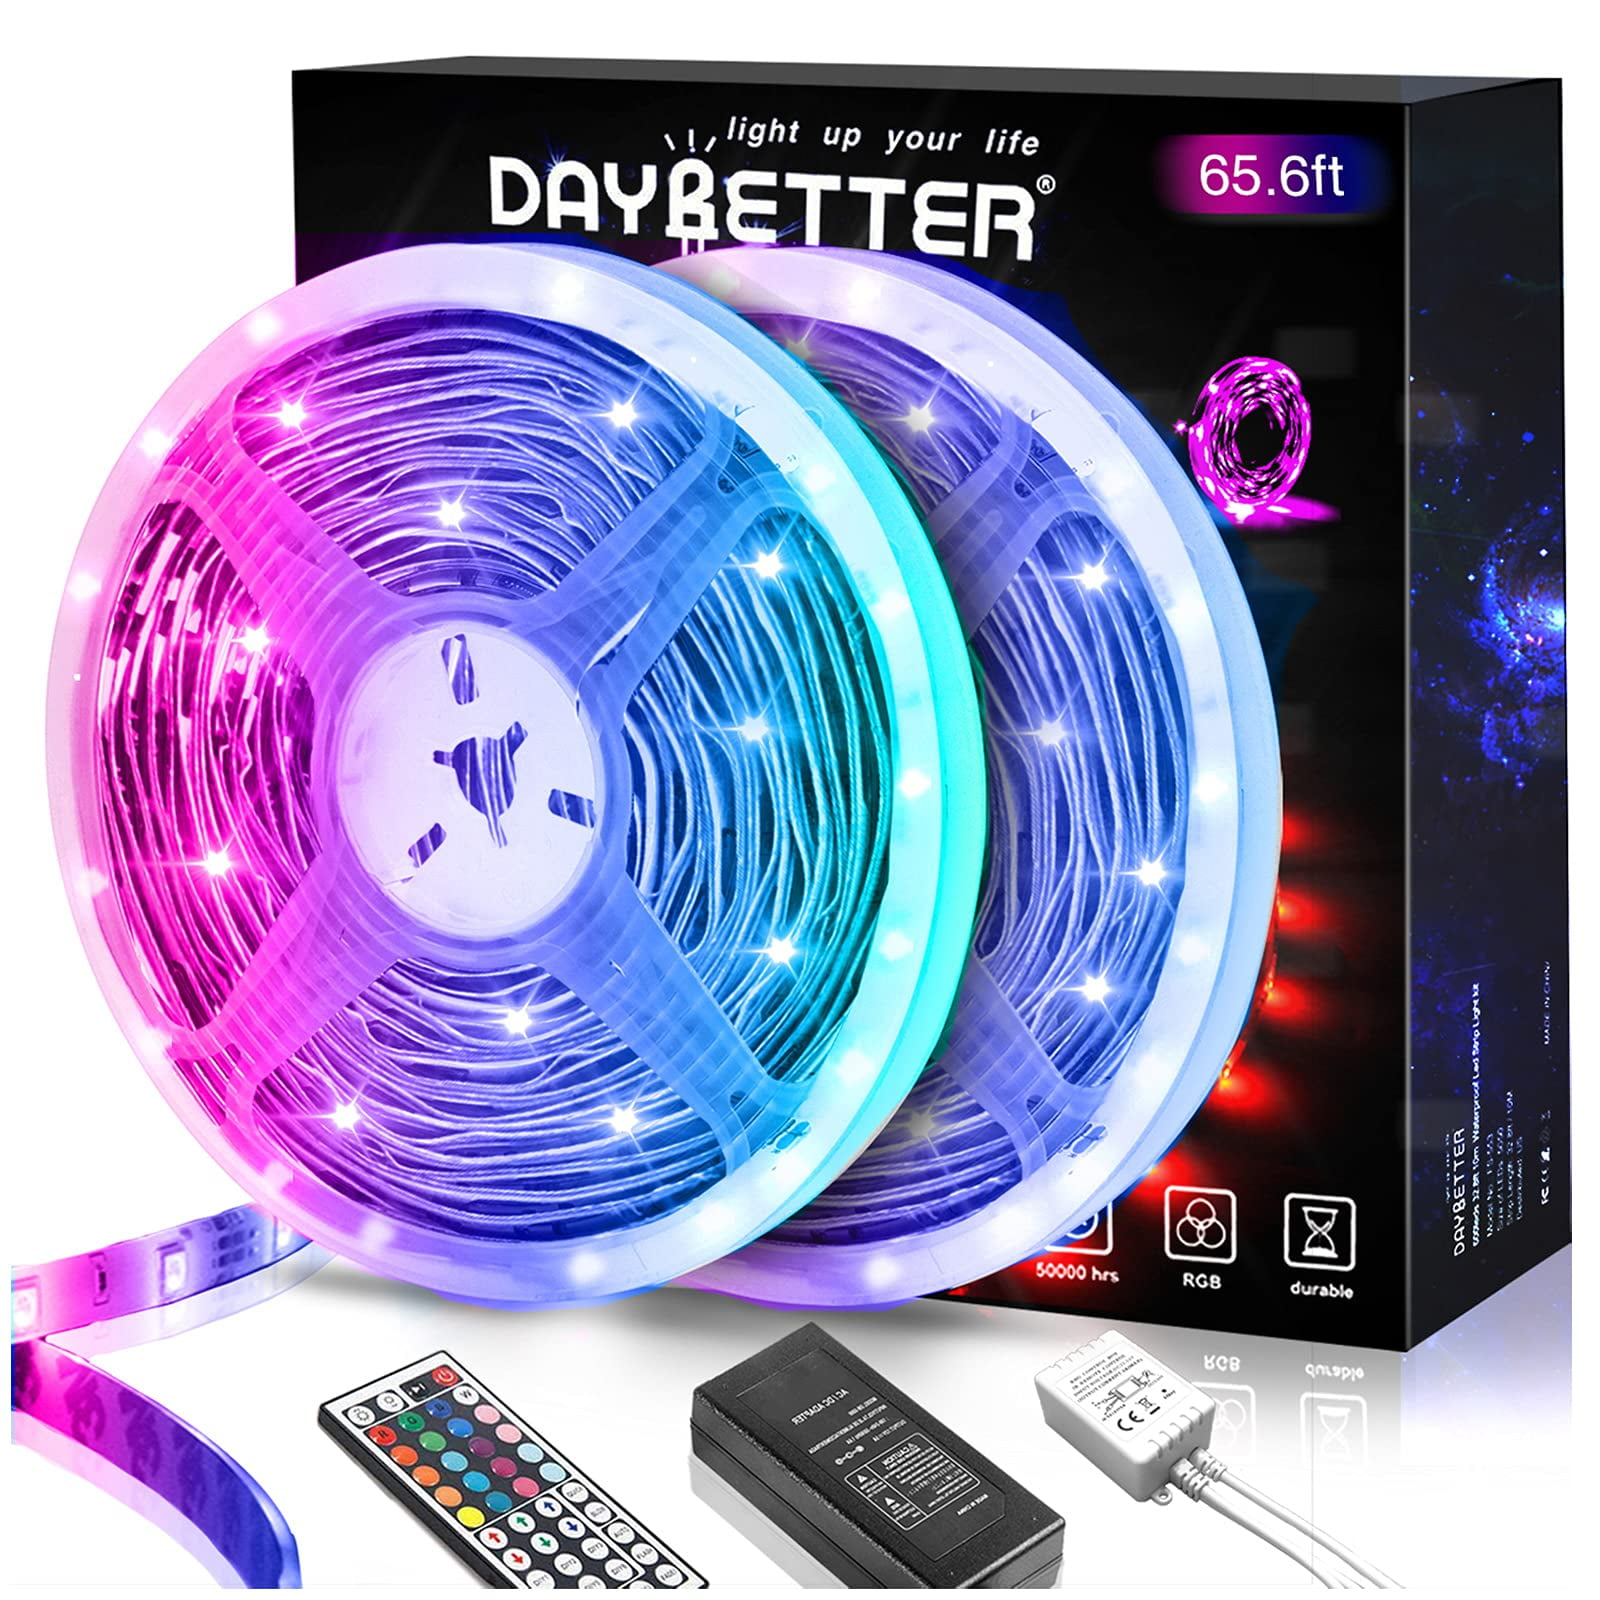 DAYBETTER (2rd Gen) SMD 5050 Remote Control Led Strip Lights 50ft Color  Changing with 44Keys Remote Controller and 12V Power Supply for Bedroom –  Daybetter